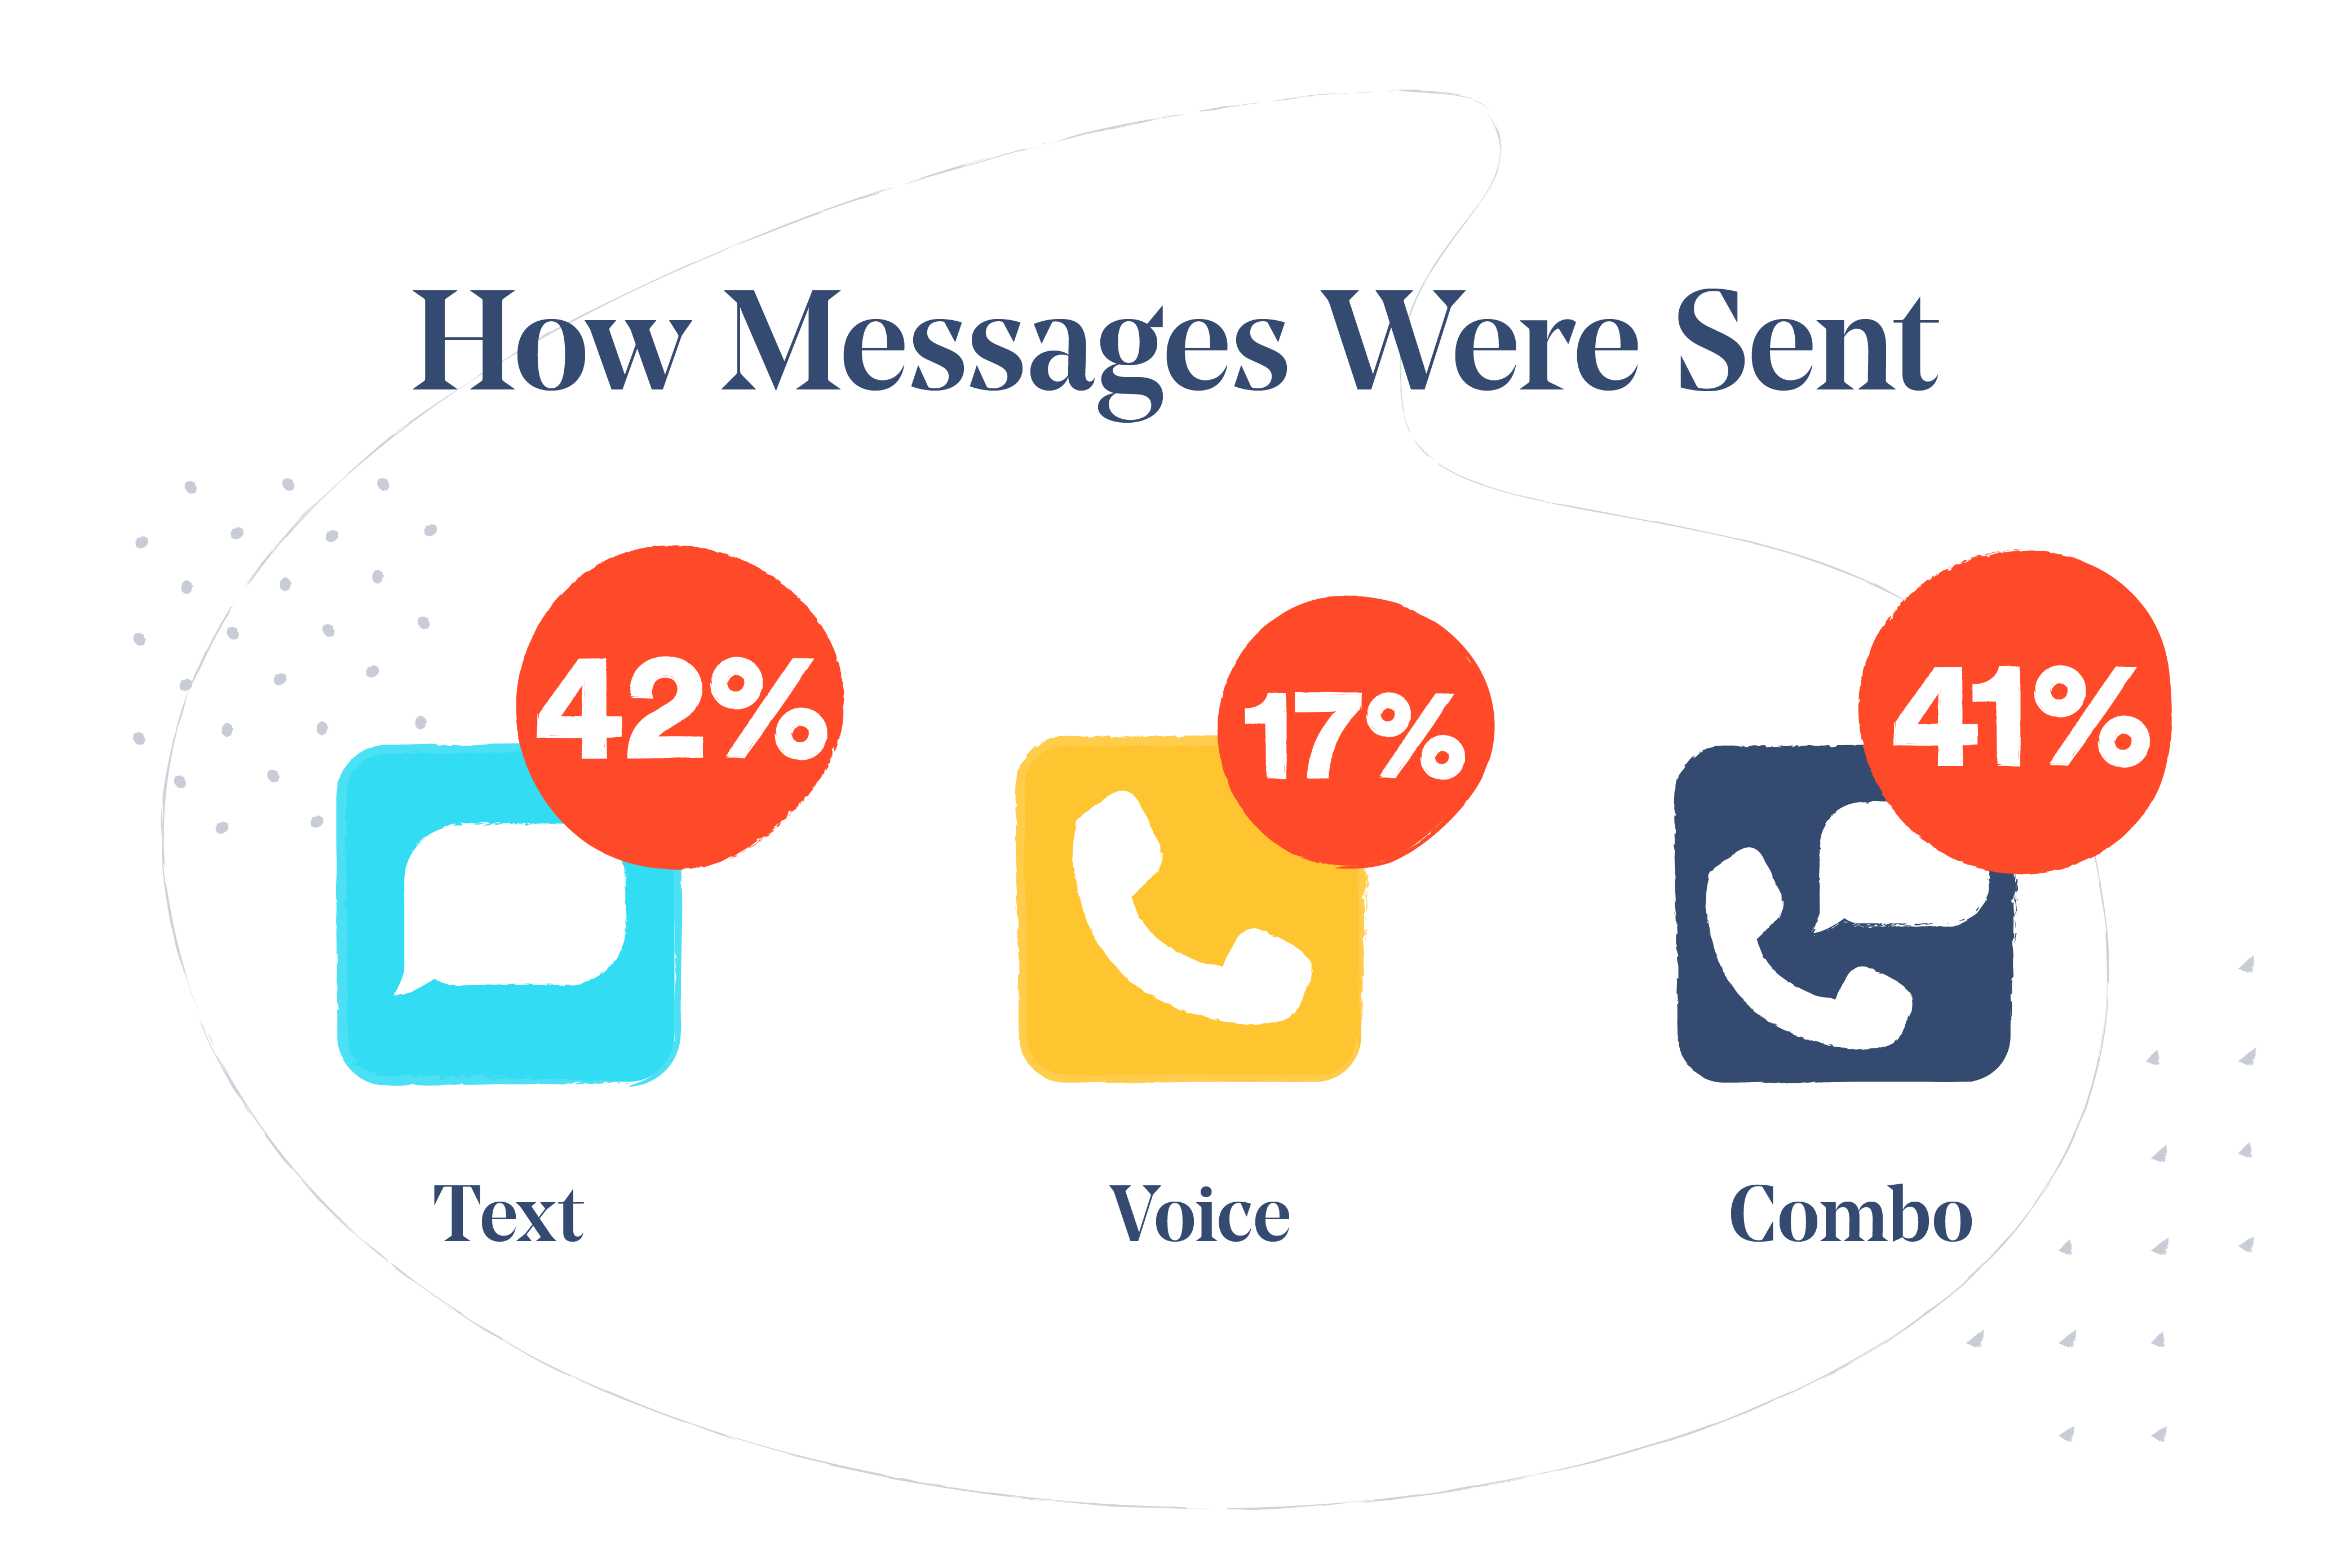 How mass messages were sent in 2021